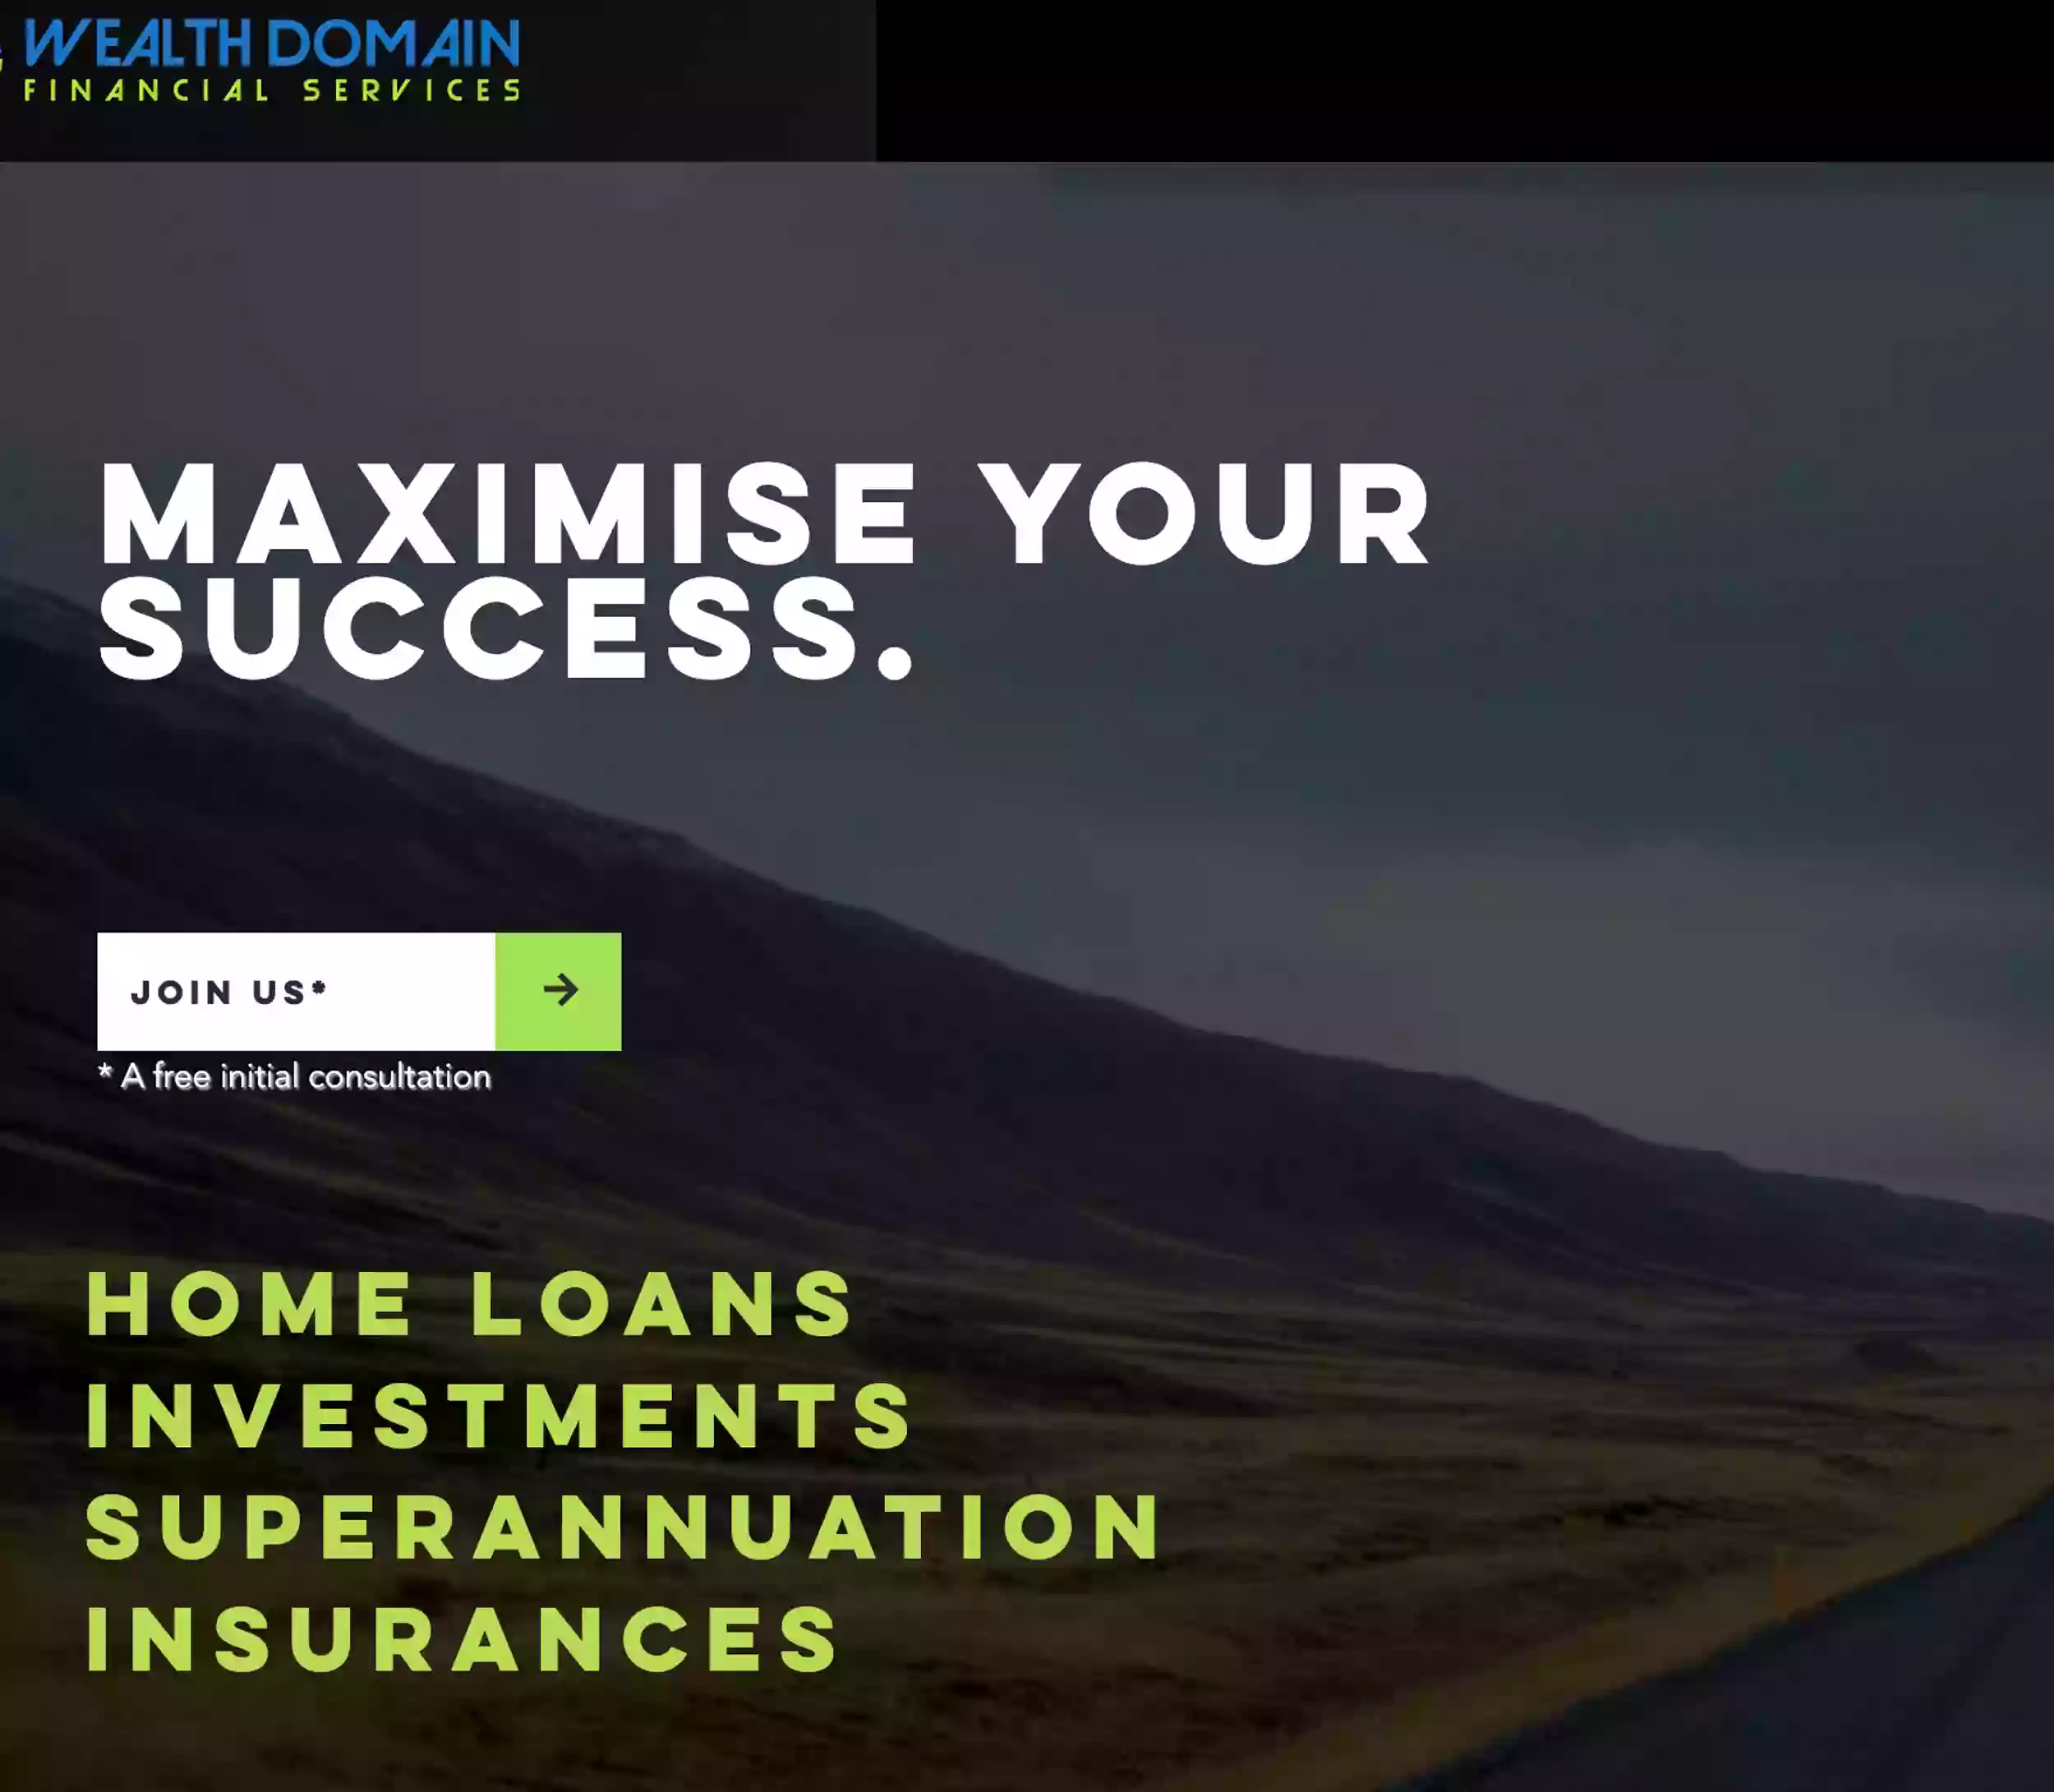 Wealth Domain Financial Services